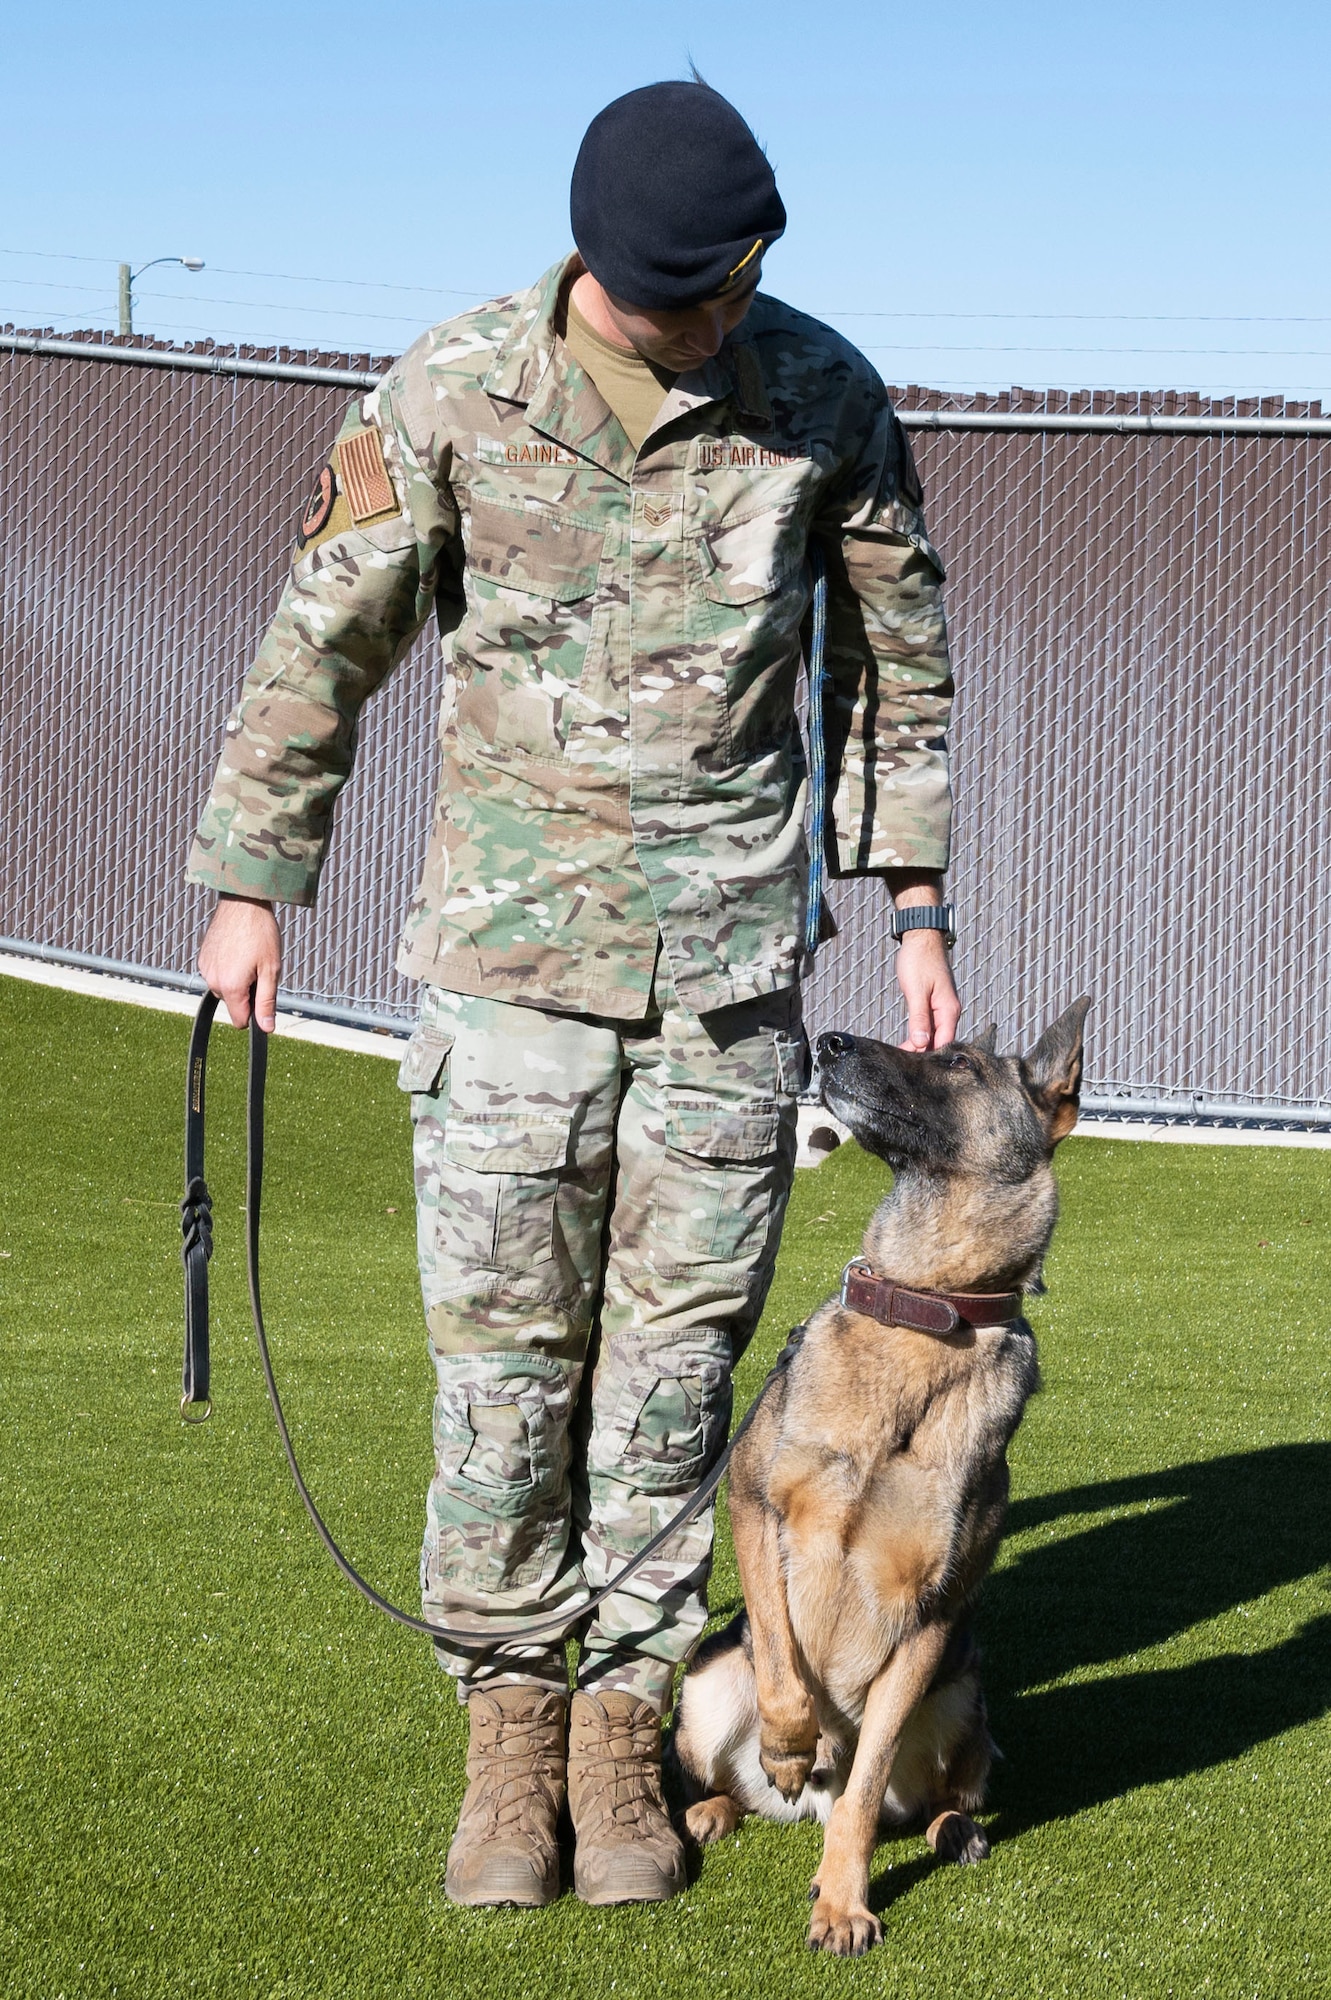 U.S. Air Force Staff Sgt. Charles Gaines, 47th Security Forces Squadron military working dog trainer, poses with Tuko, a military working dog, at the 47th Security Forces Squadron military working dog training area at Laughlin Air Force Base, Texas, on Jan. 13, 2023. MWD handlers employ their dogs to conduct vehicle searches, and searches of open areas, buildings, and other locations for the detection of suspects, explosives or illegal drugs. (U.S. Air Force photo by Airman 1st Class Kailee Reynolds)